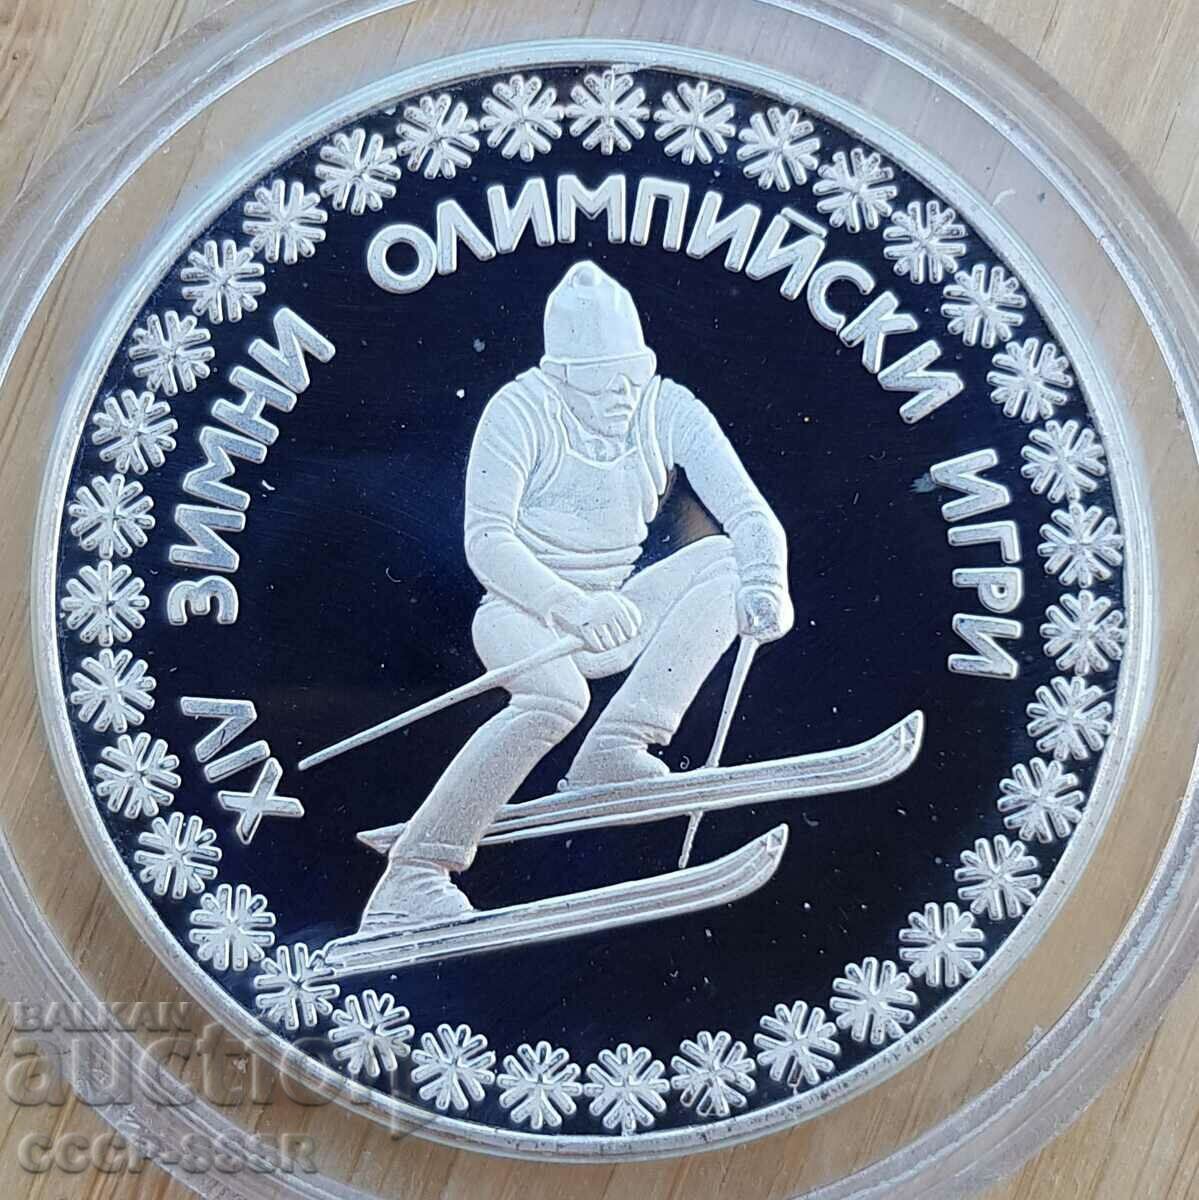 10 BGN 1984 "XIV Winter Olympic Games", skis, silver